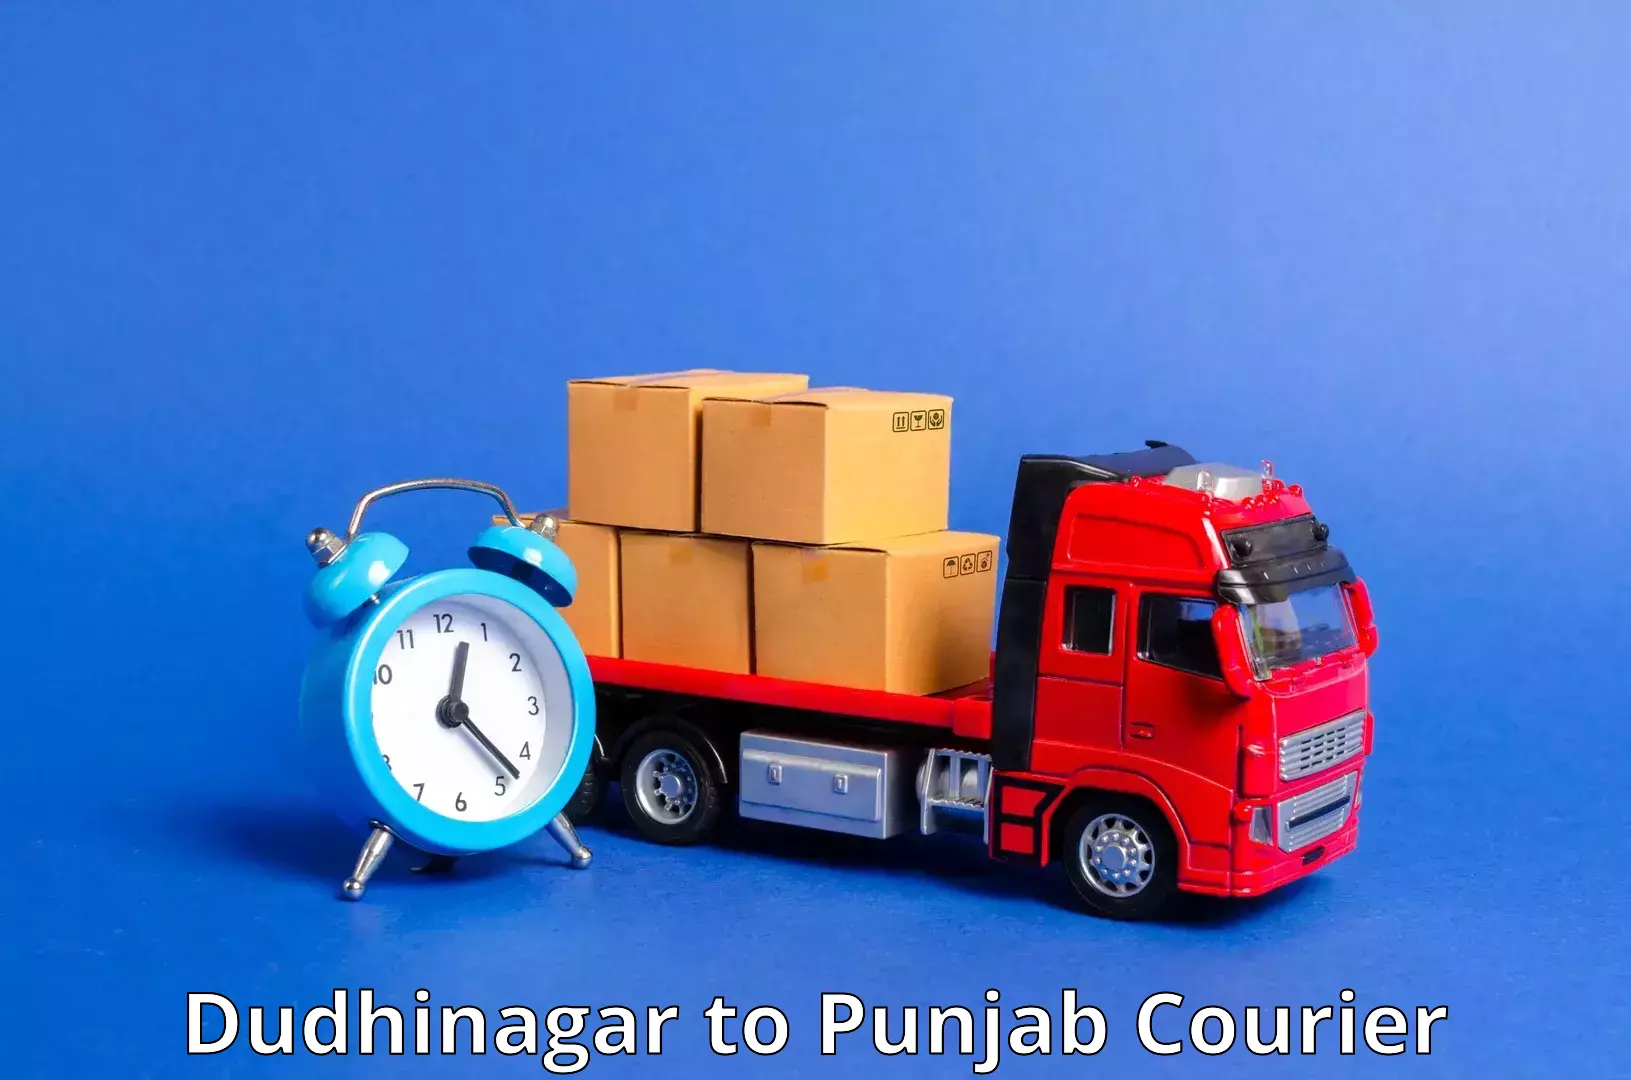 User-friendly delivery service Dudhinagar to Patiala